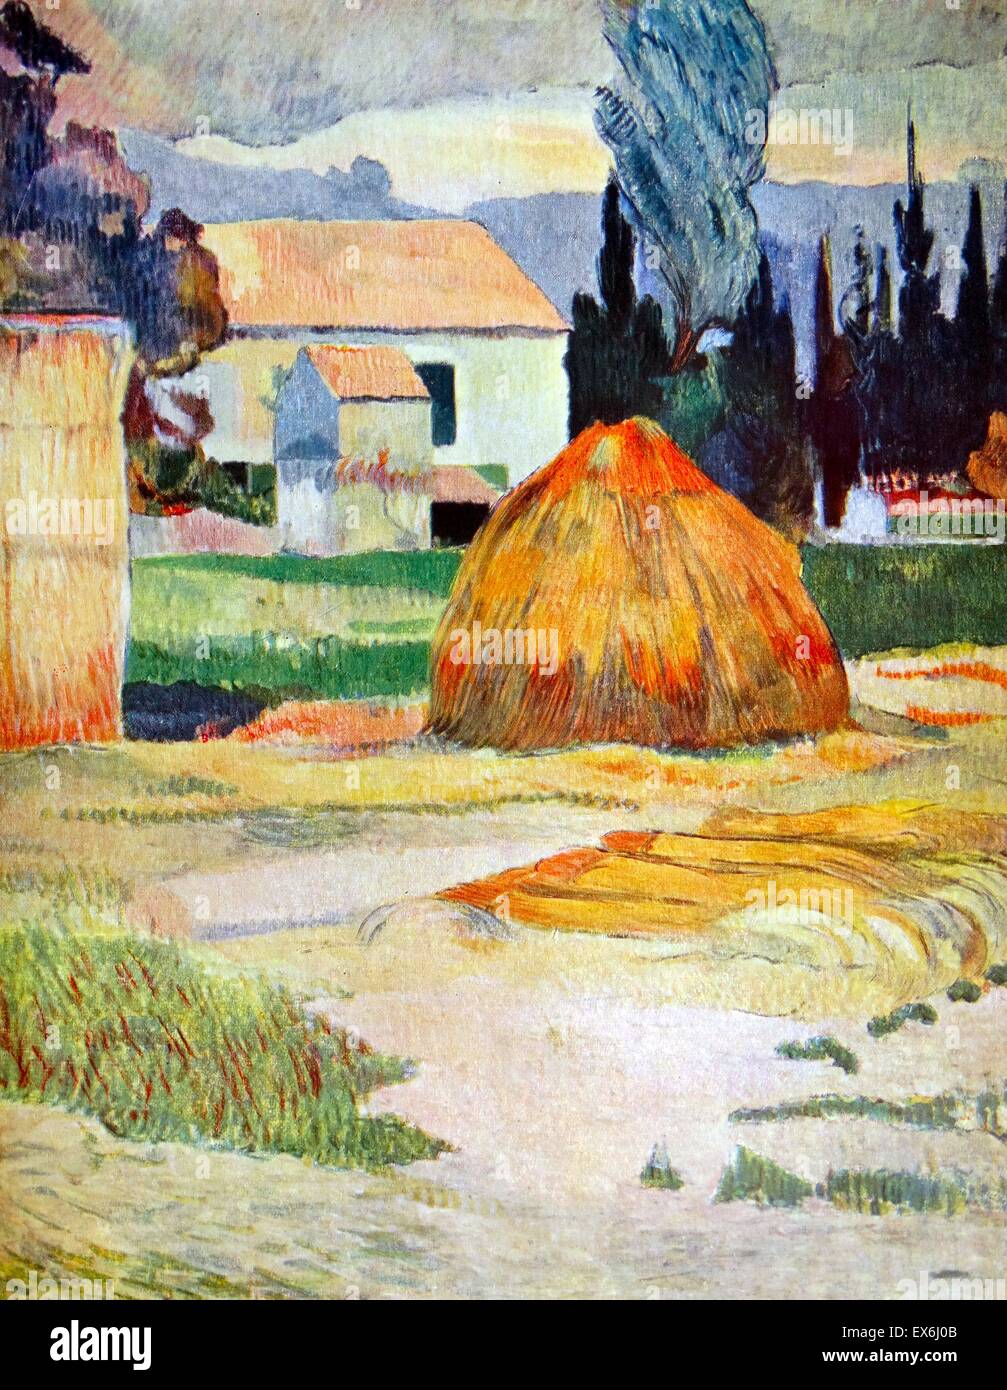 Painting titled 'Landscape Near Arles'. By Eugène Henri Paul Gauguin (1848-1903) French Post-Impressionist artist. Dated 1888 Stock Photo